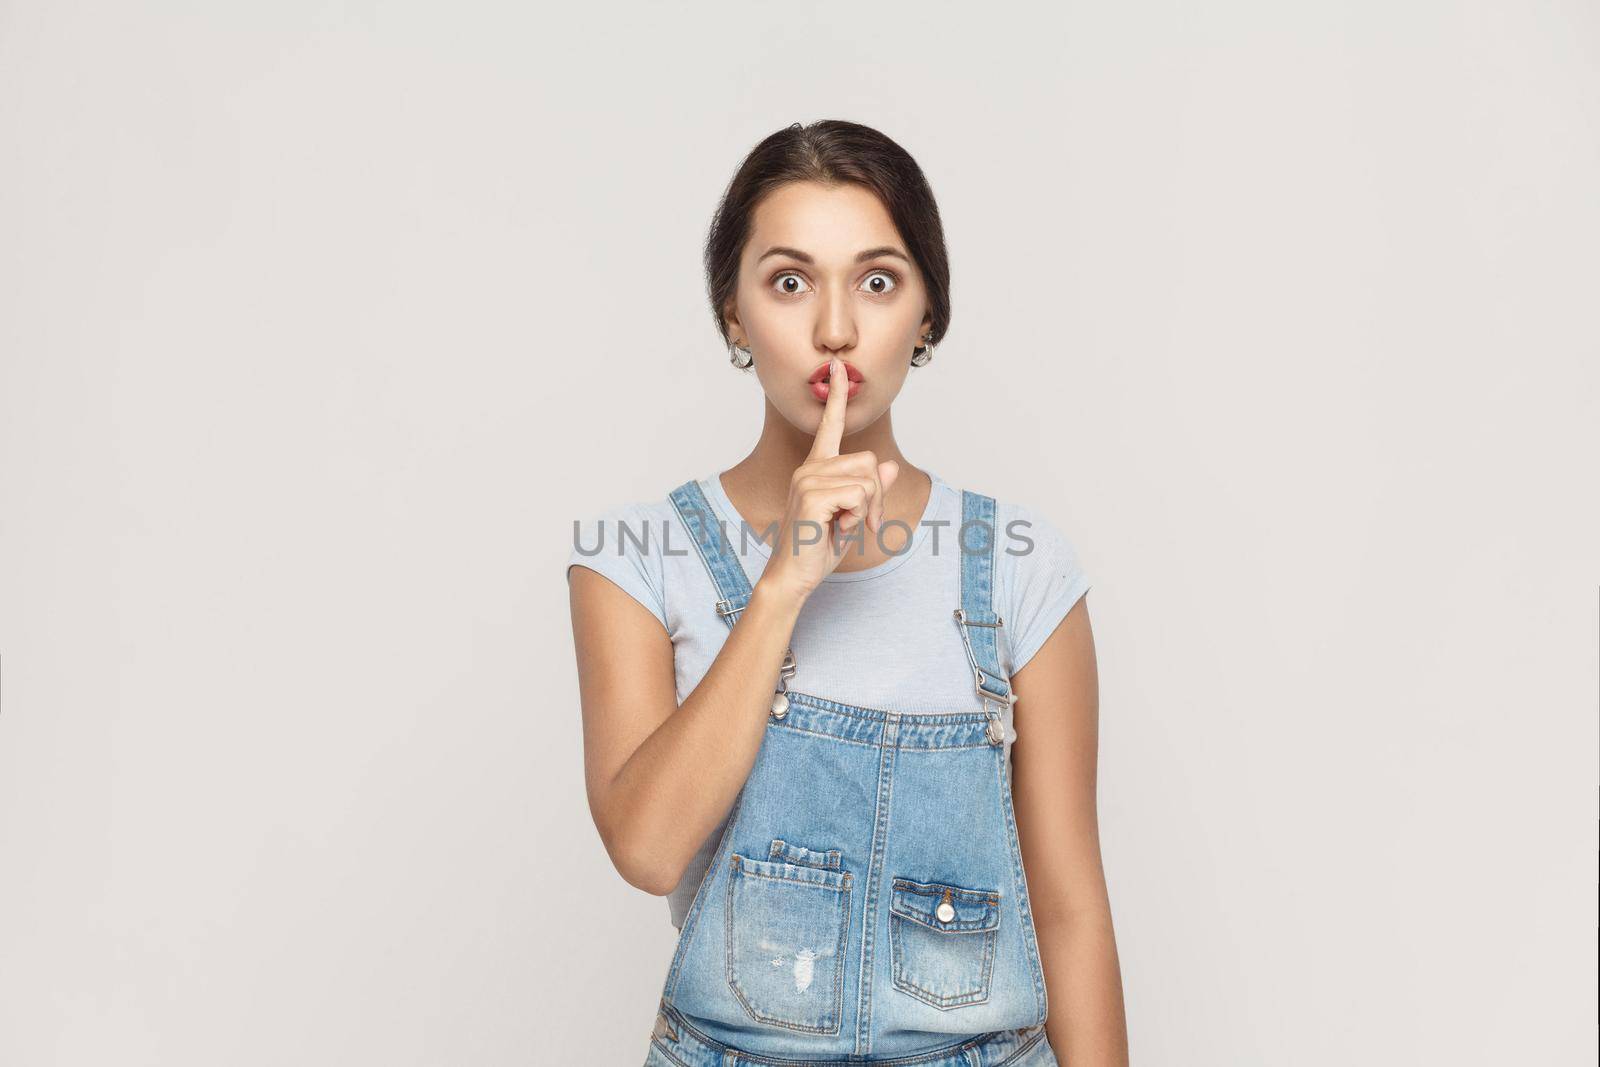 Shh sign. Beautiful indian woman looking at camera with silent sign. Studio shot, on gray background.